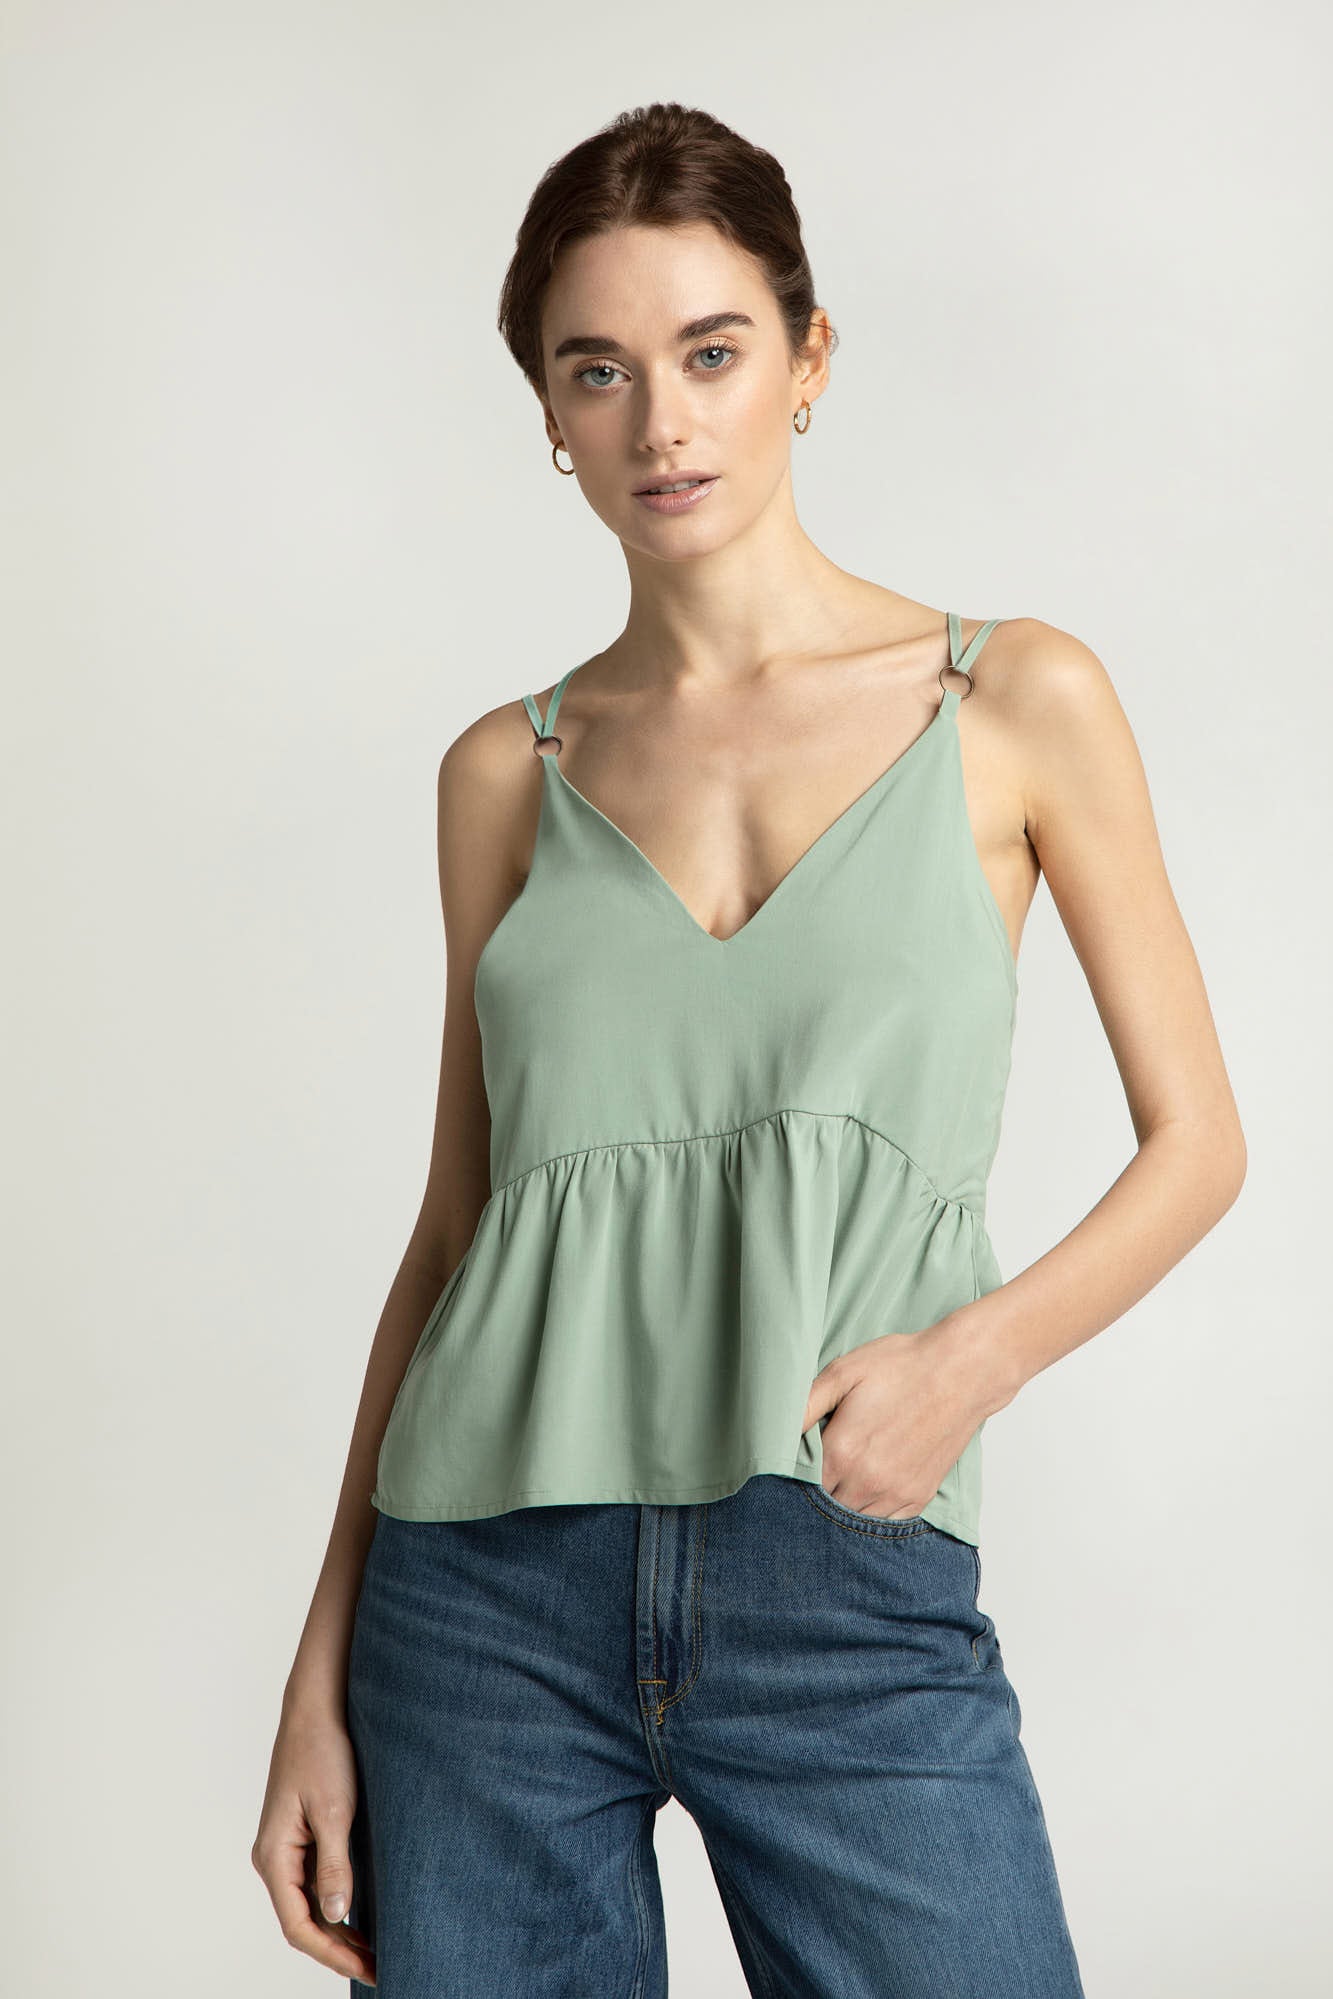 Top RONNIA in delicate green by LOVJOI made from ECOVERO™ 